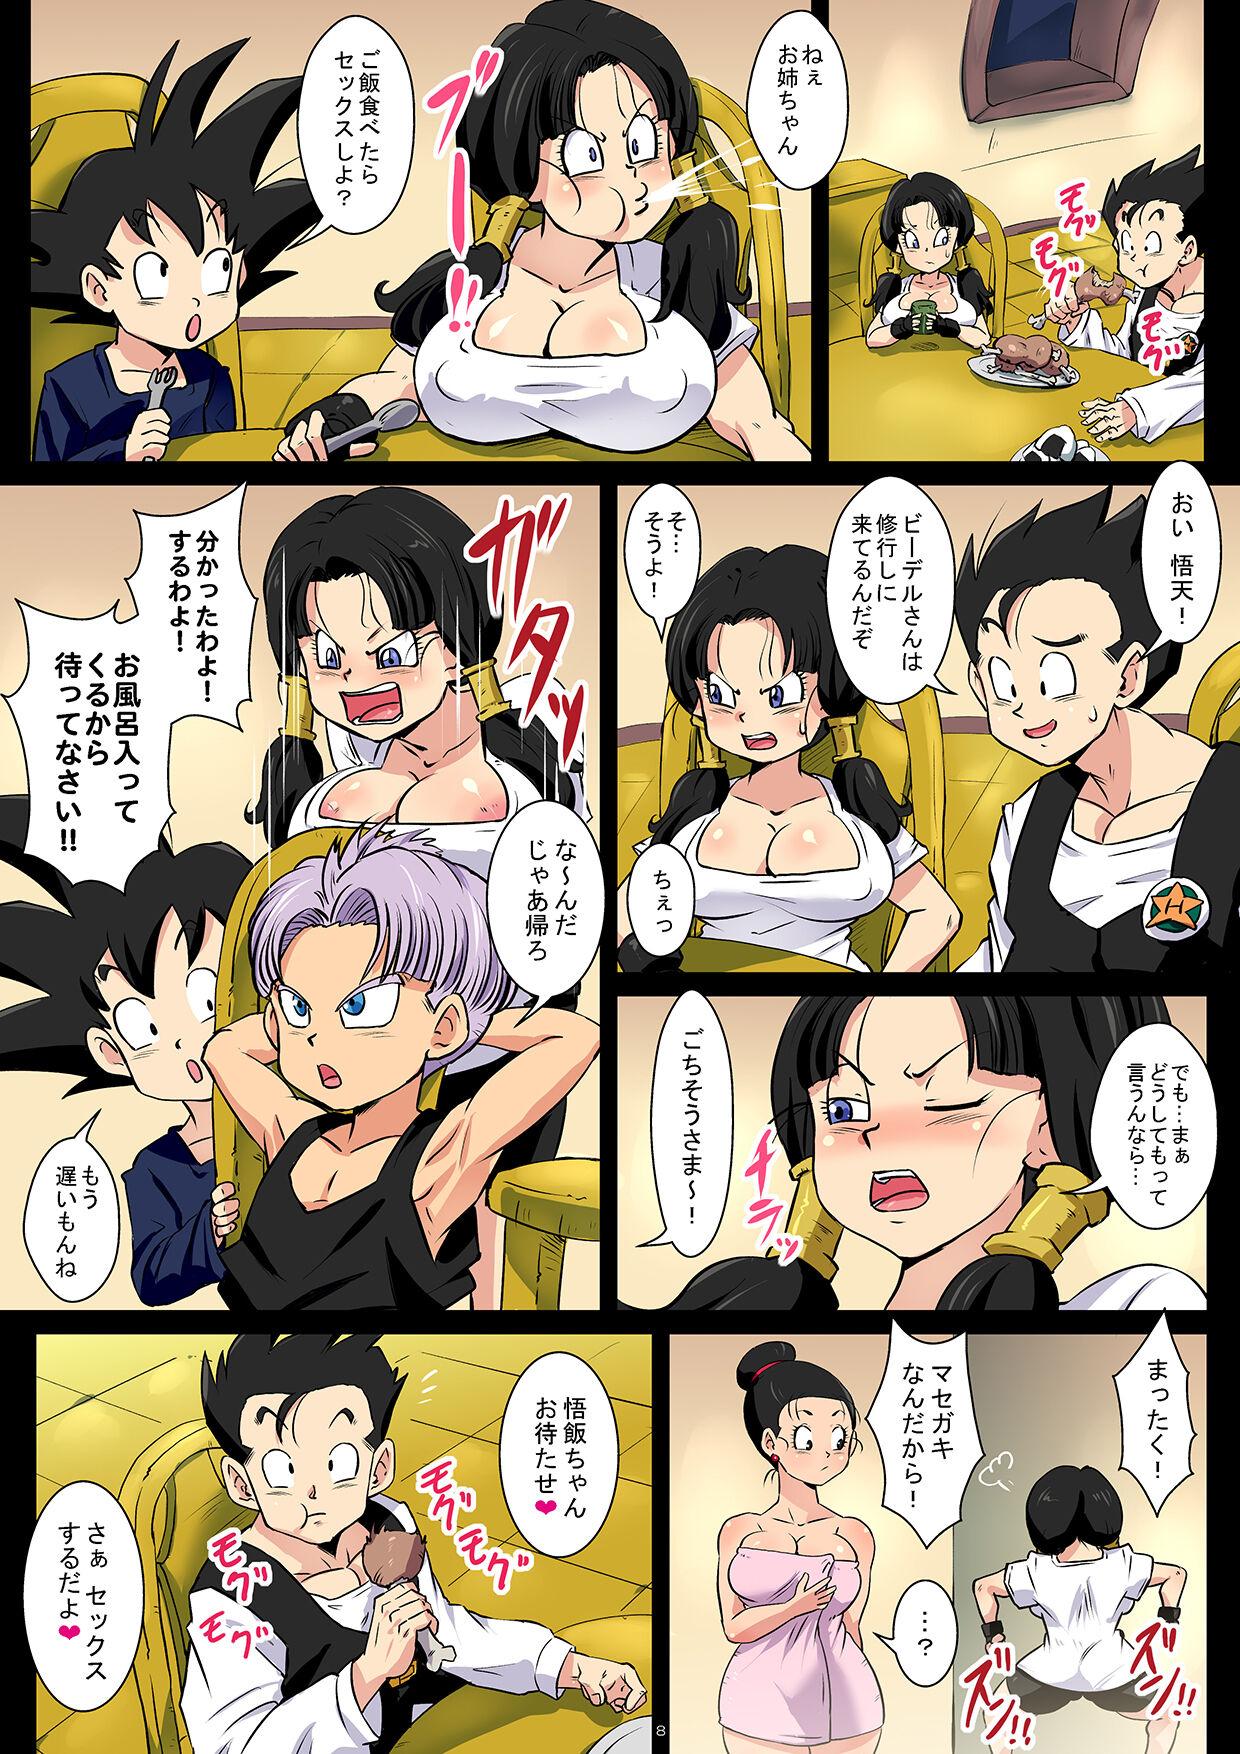 Lips Gohan is addicted to sex with Chi Chi - Dragon ball z Free Hardcore - Page 8